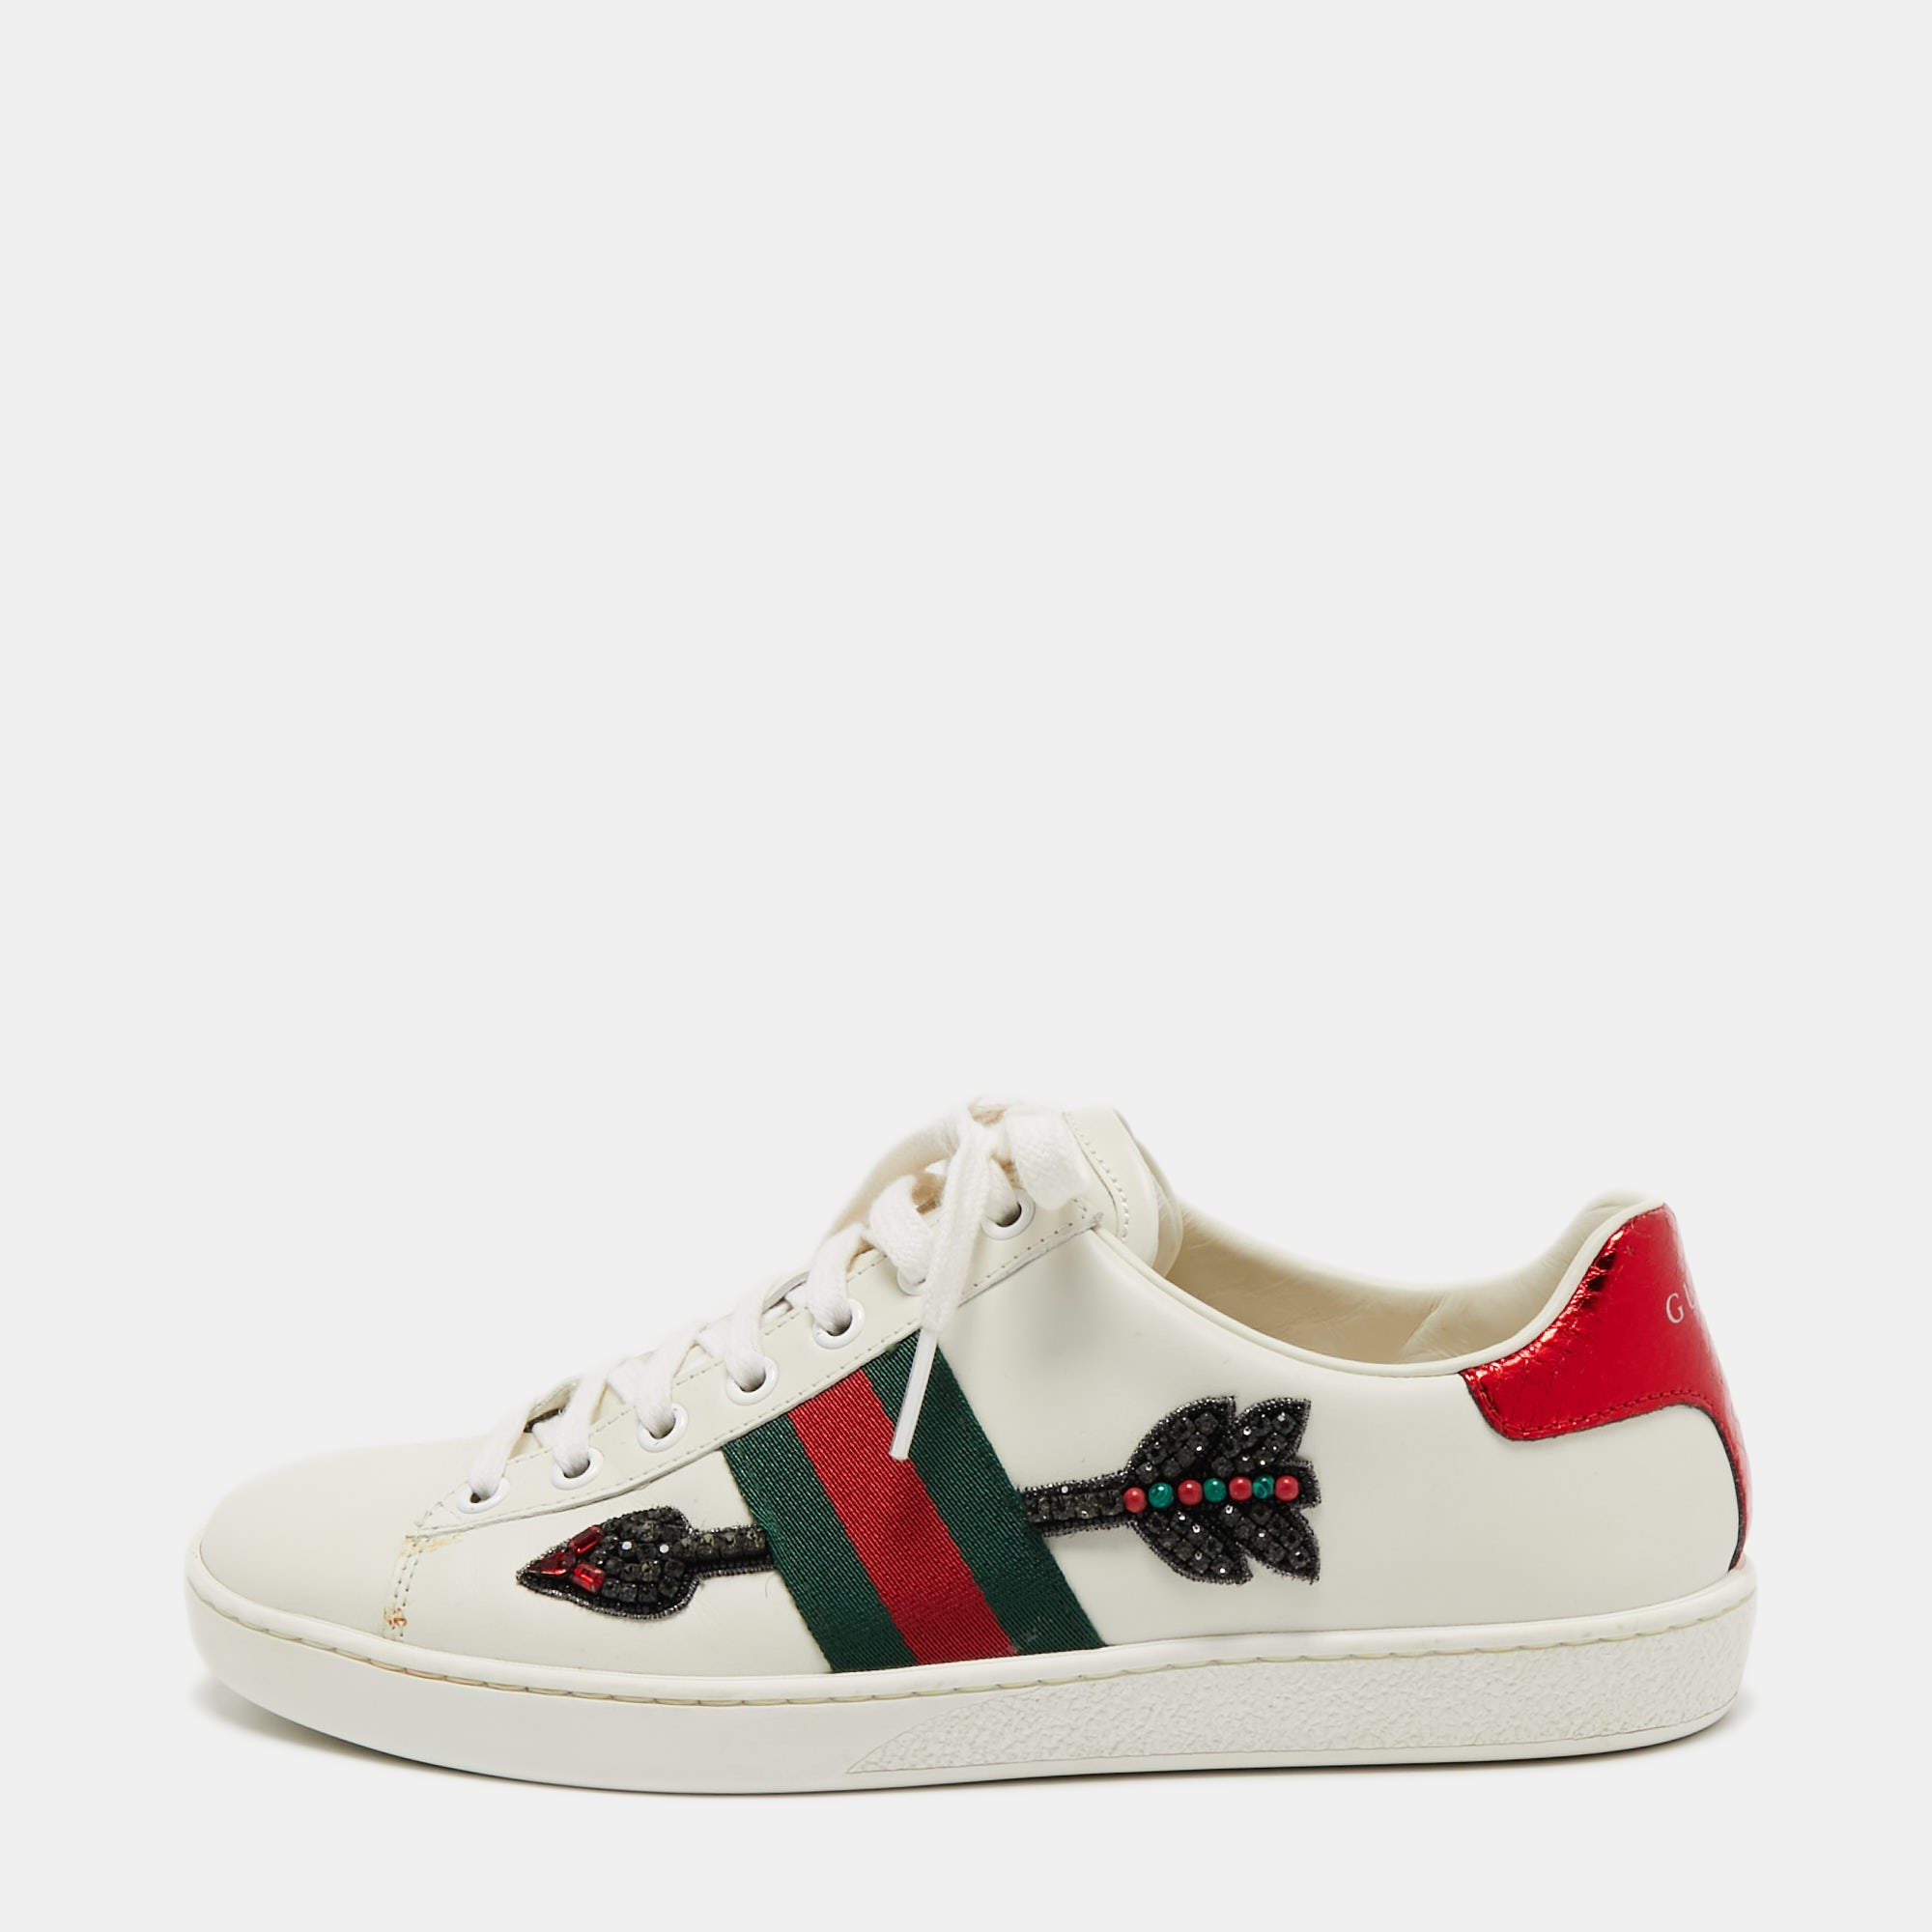 Gucci White Leather Crystal Embellished Arrow Ace Sneakers Size 37.5